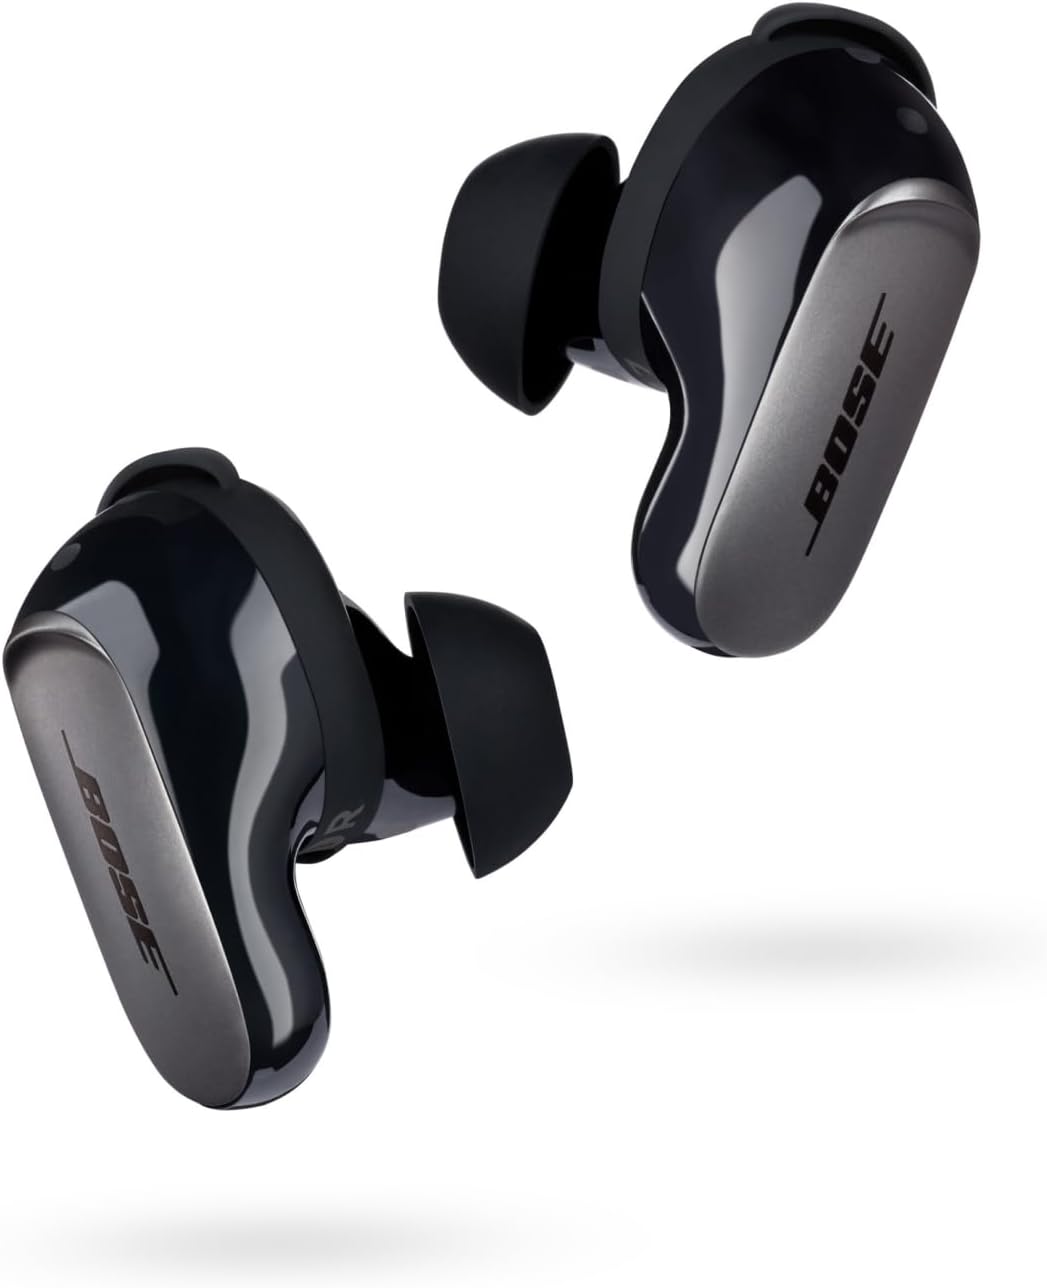 NEW Bose QuietComfort Ultra Wireless Noise Cancelling Earbuds, Bluetooth Earbuds with Spatial Audio and World-Class Noise Cancellation, Black